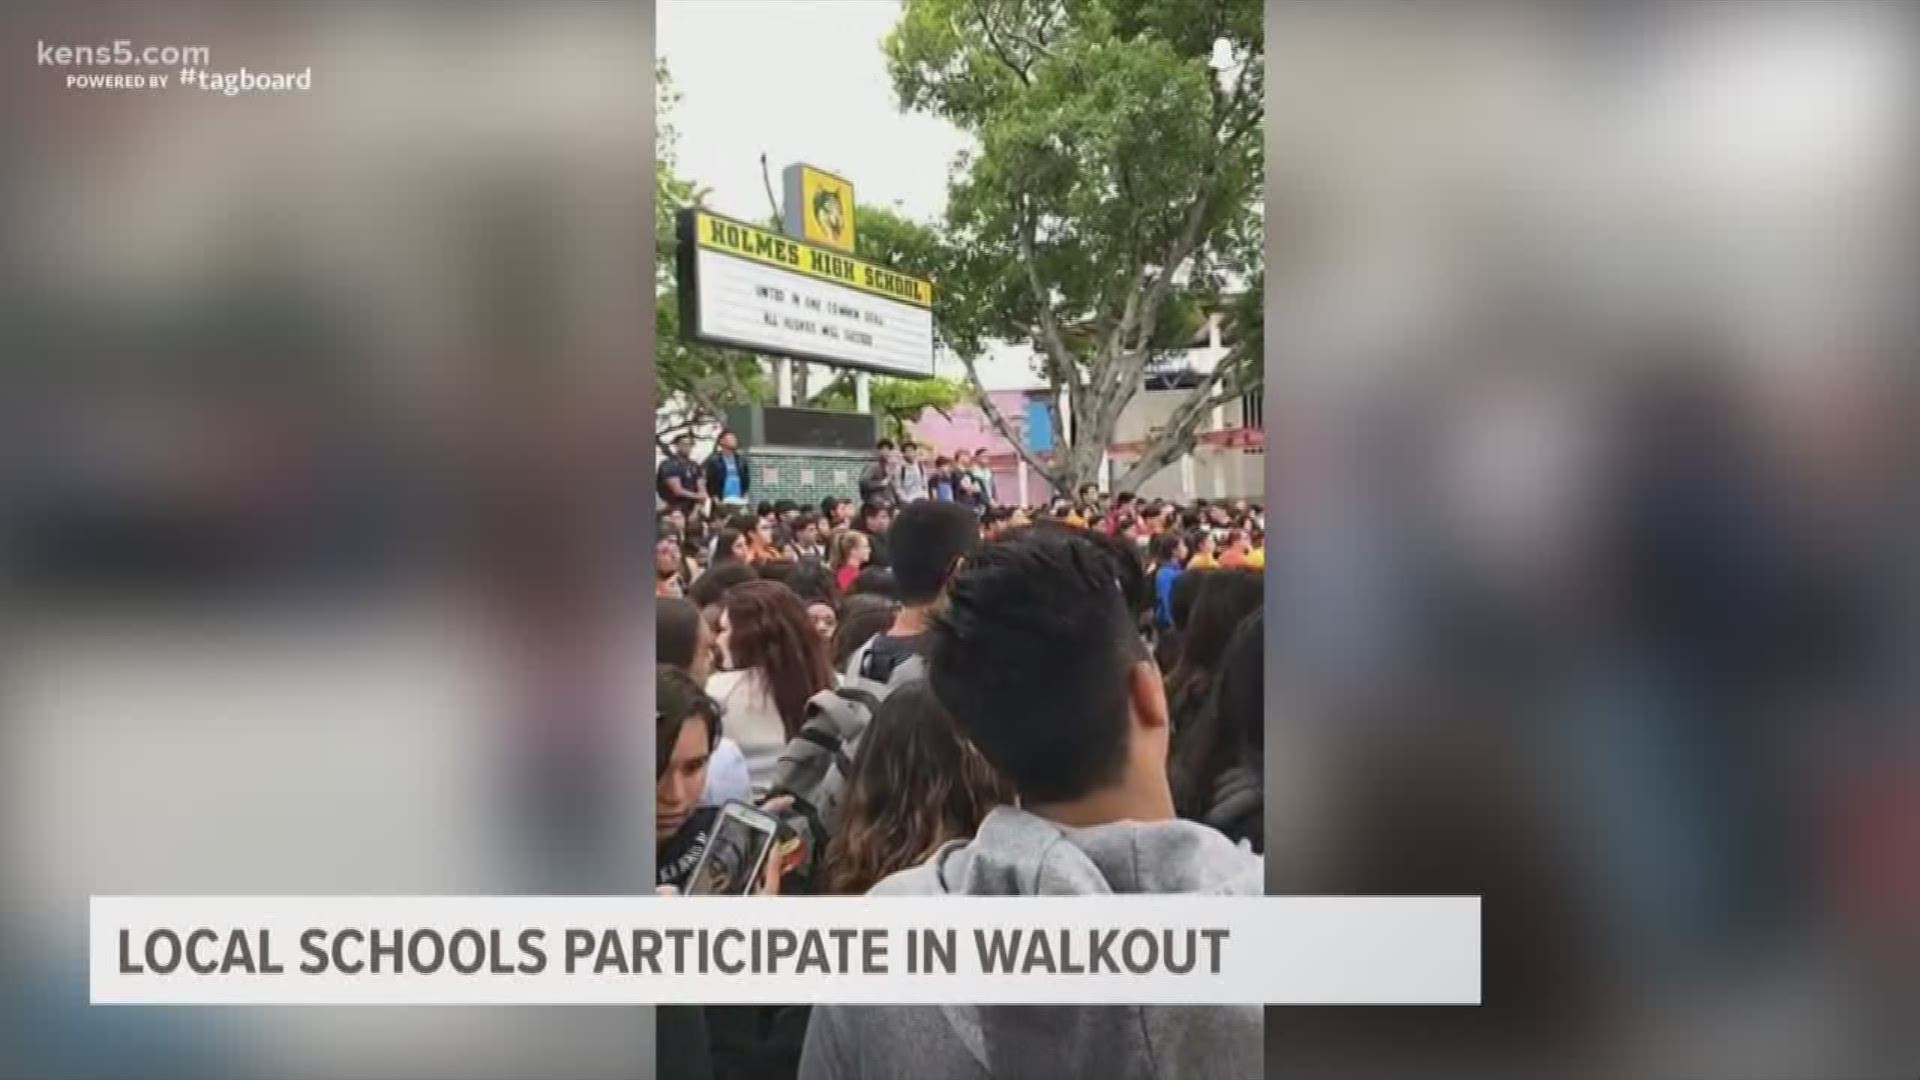 San Antonio students walk out of class to protest gun violence (KENS 5 Eyewitness News @ Noon - April 20, 2018)